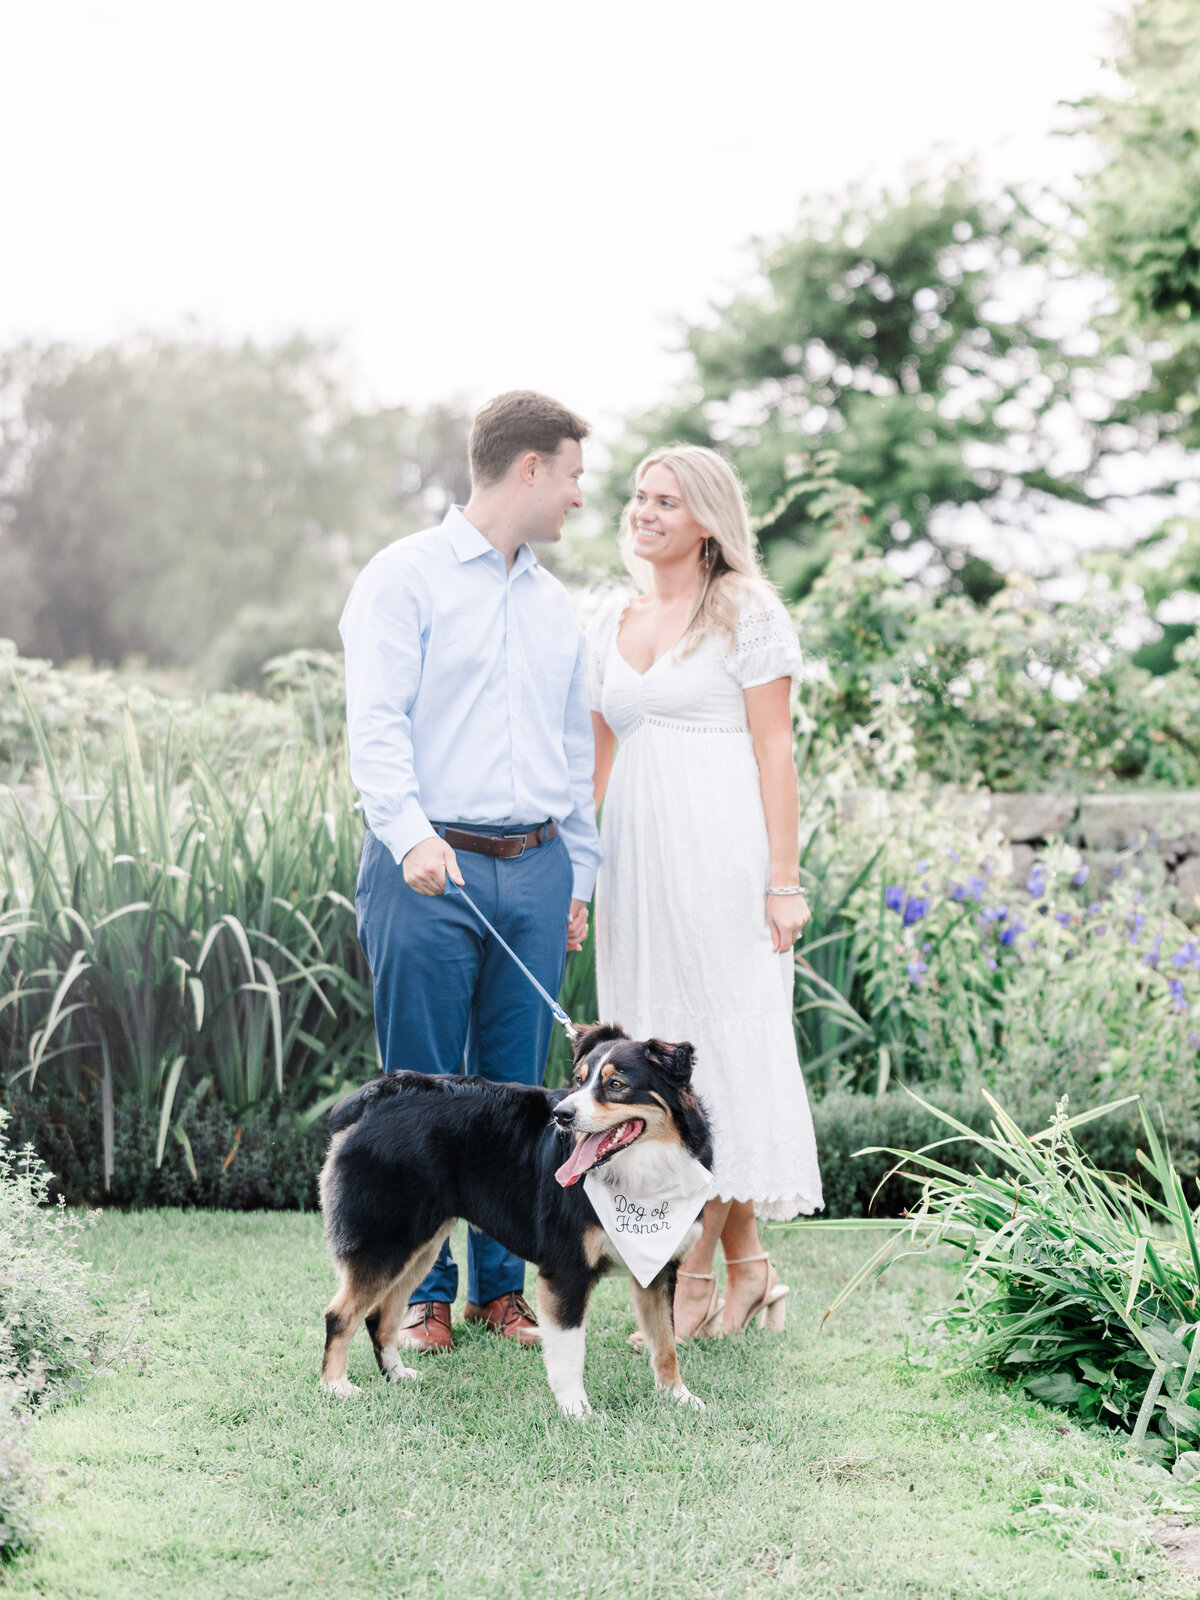 christine-antonio-engagement-session-eolia-mansion-harkness-park-waterford-ct-54